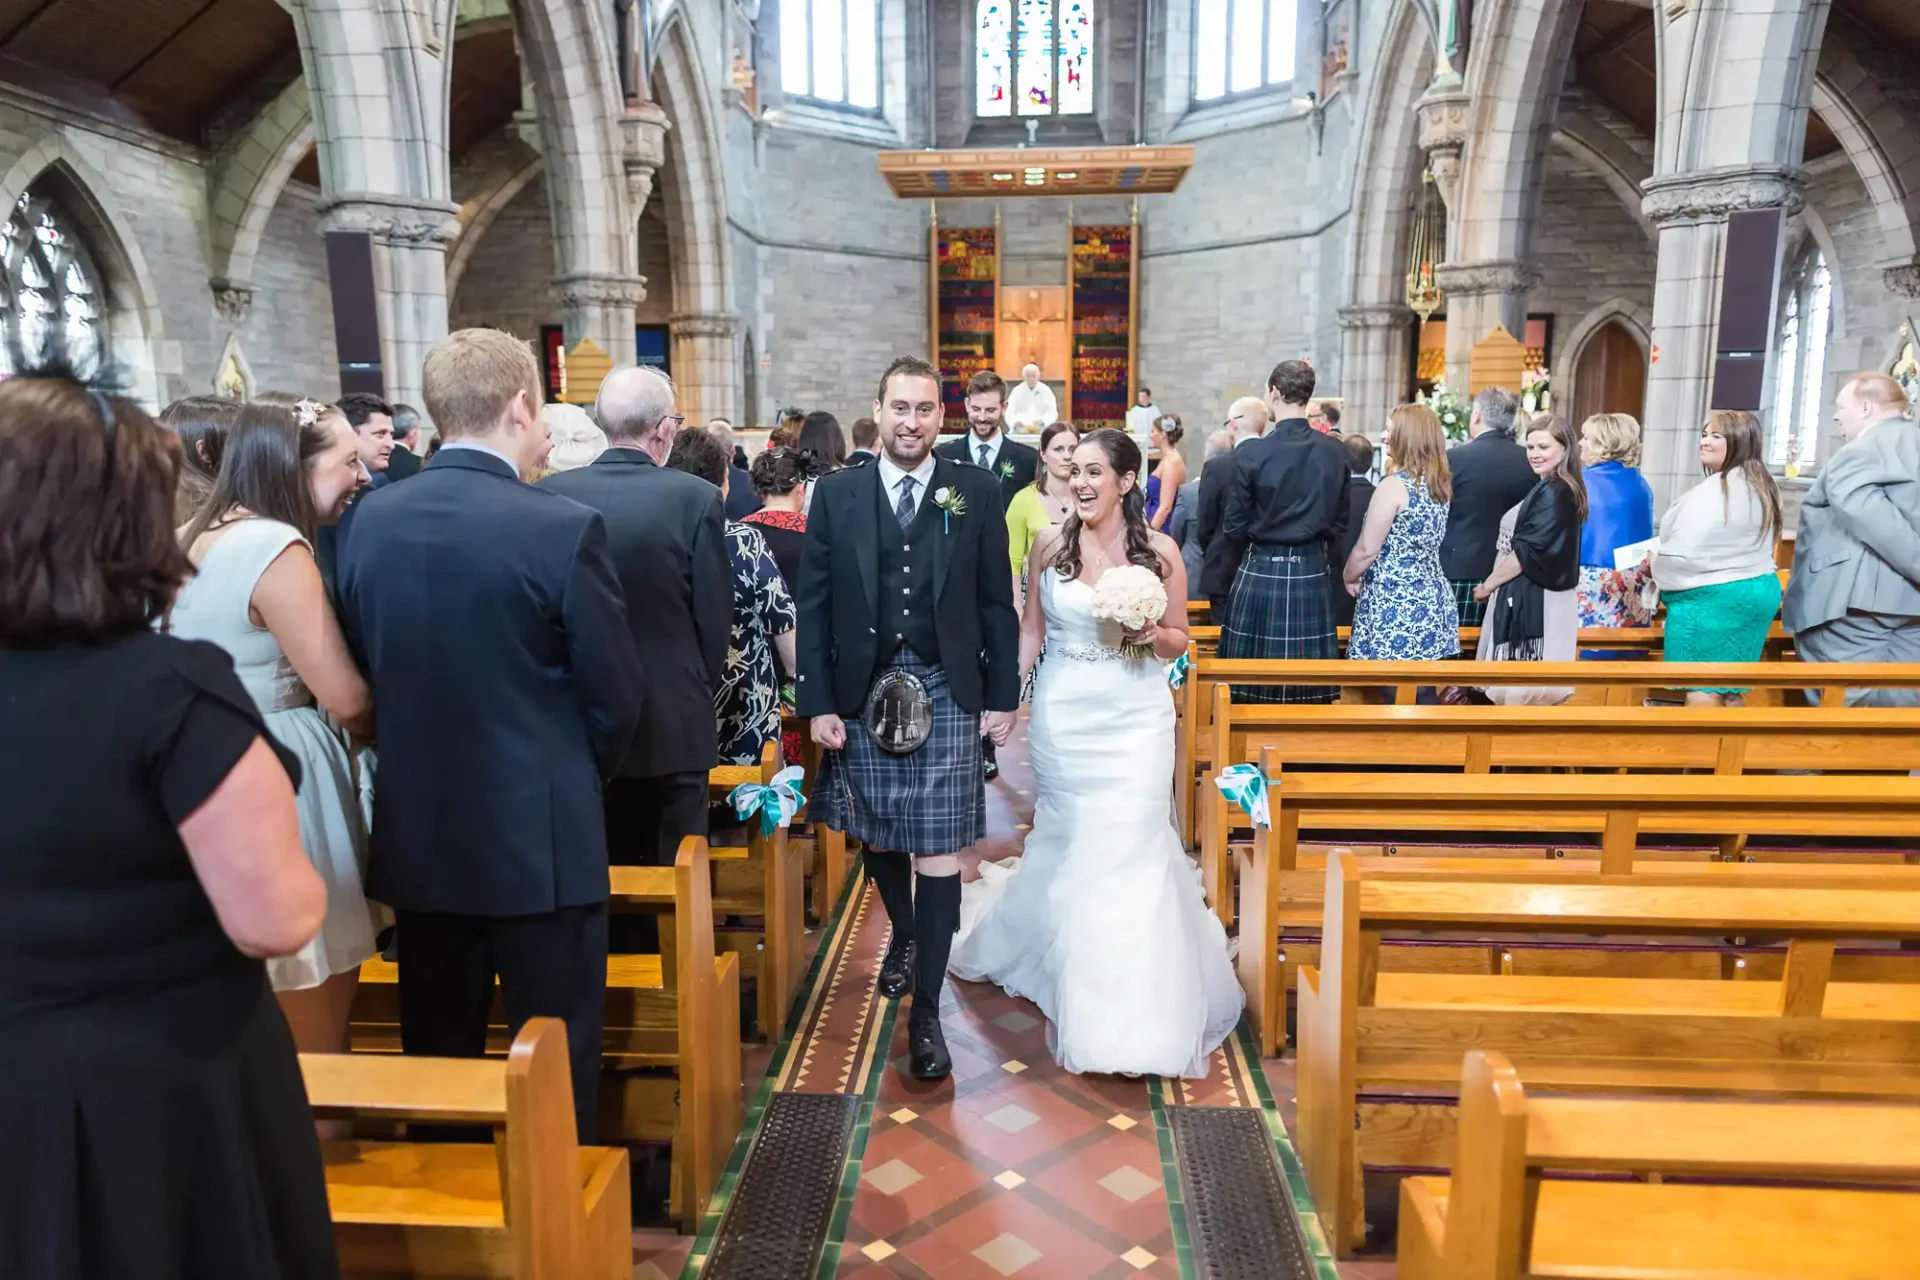 Newlywed couple smiling as they walk down the aisle in a church, surrounded by guests, with the groom in a kilt.